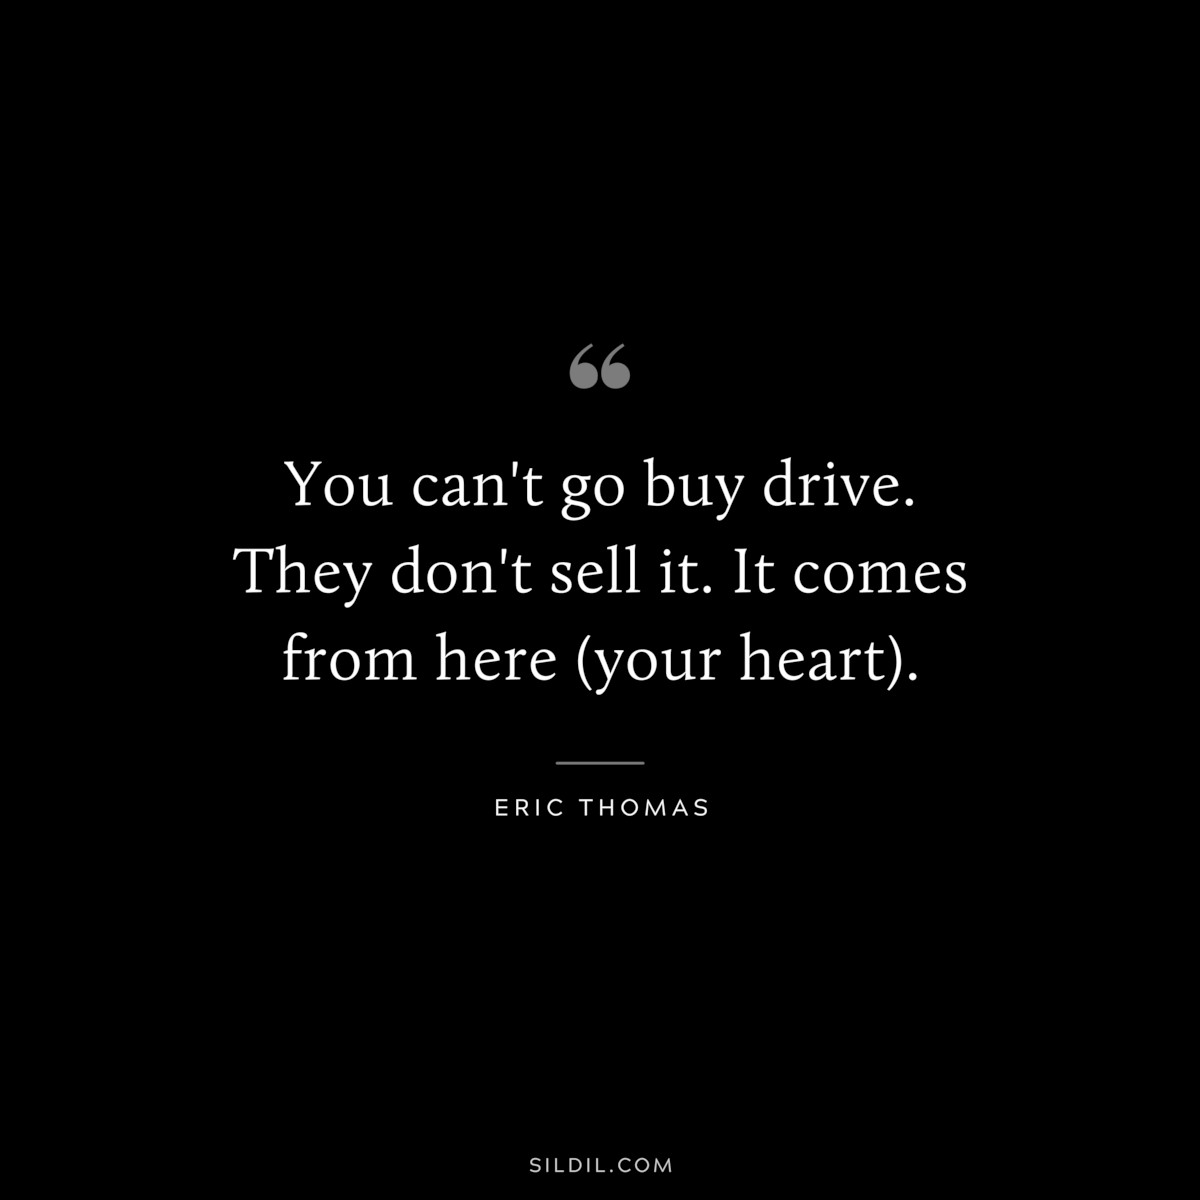 You can't go buy drive. They don't sell it. It comes from here (your heart). ― Eric Thomas